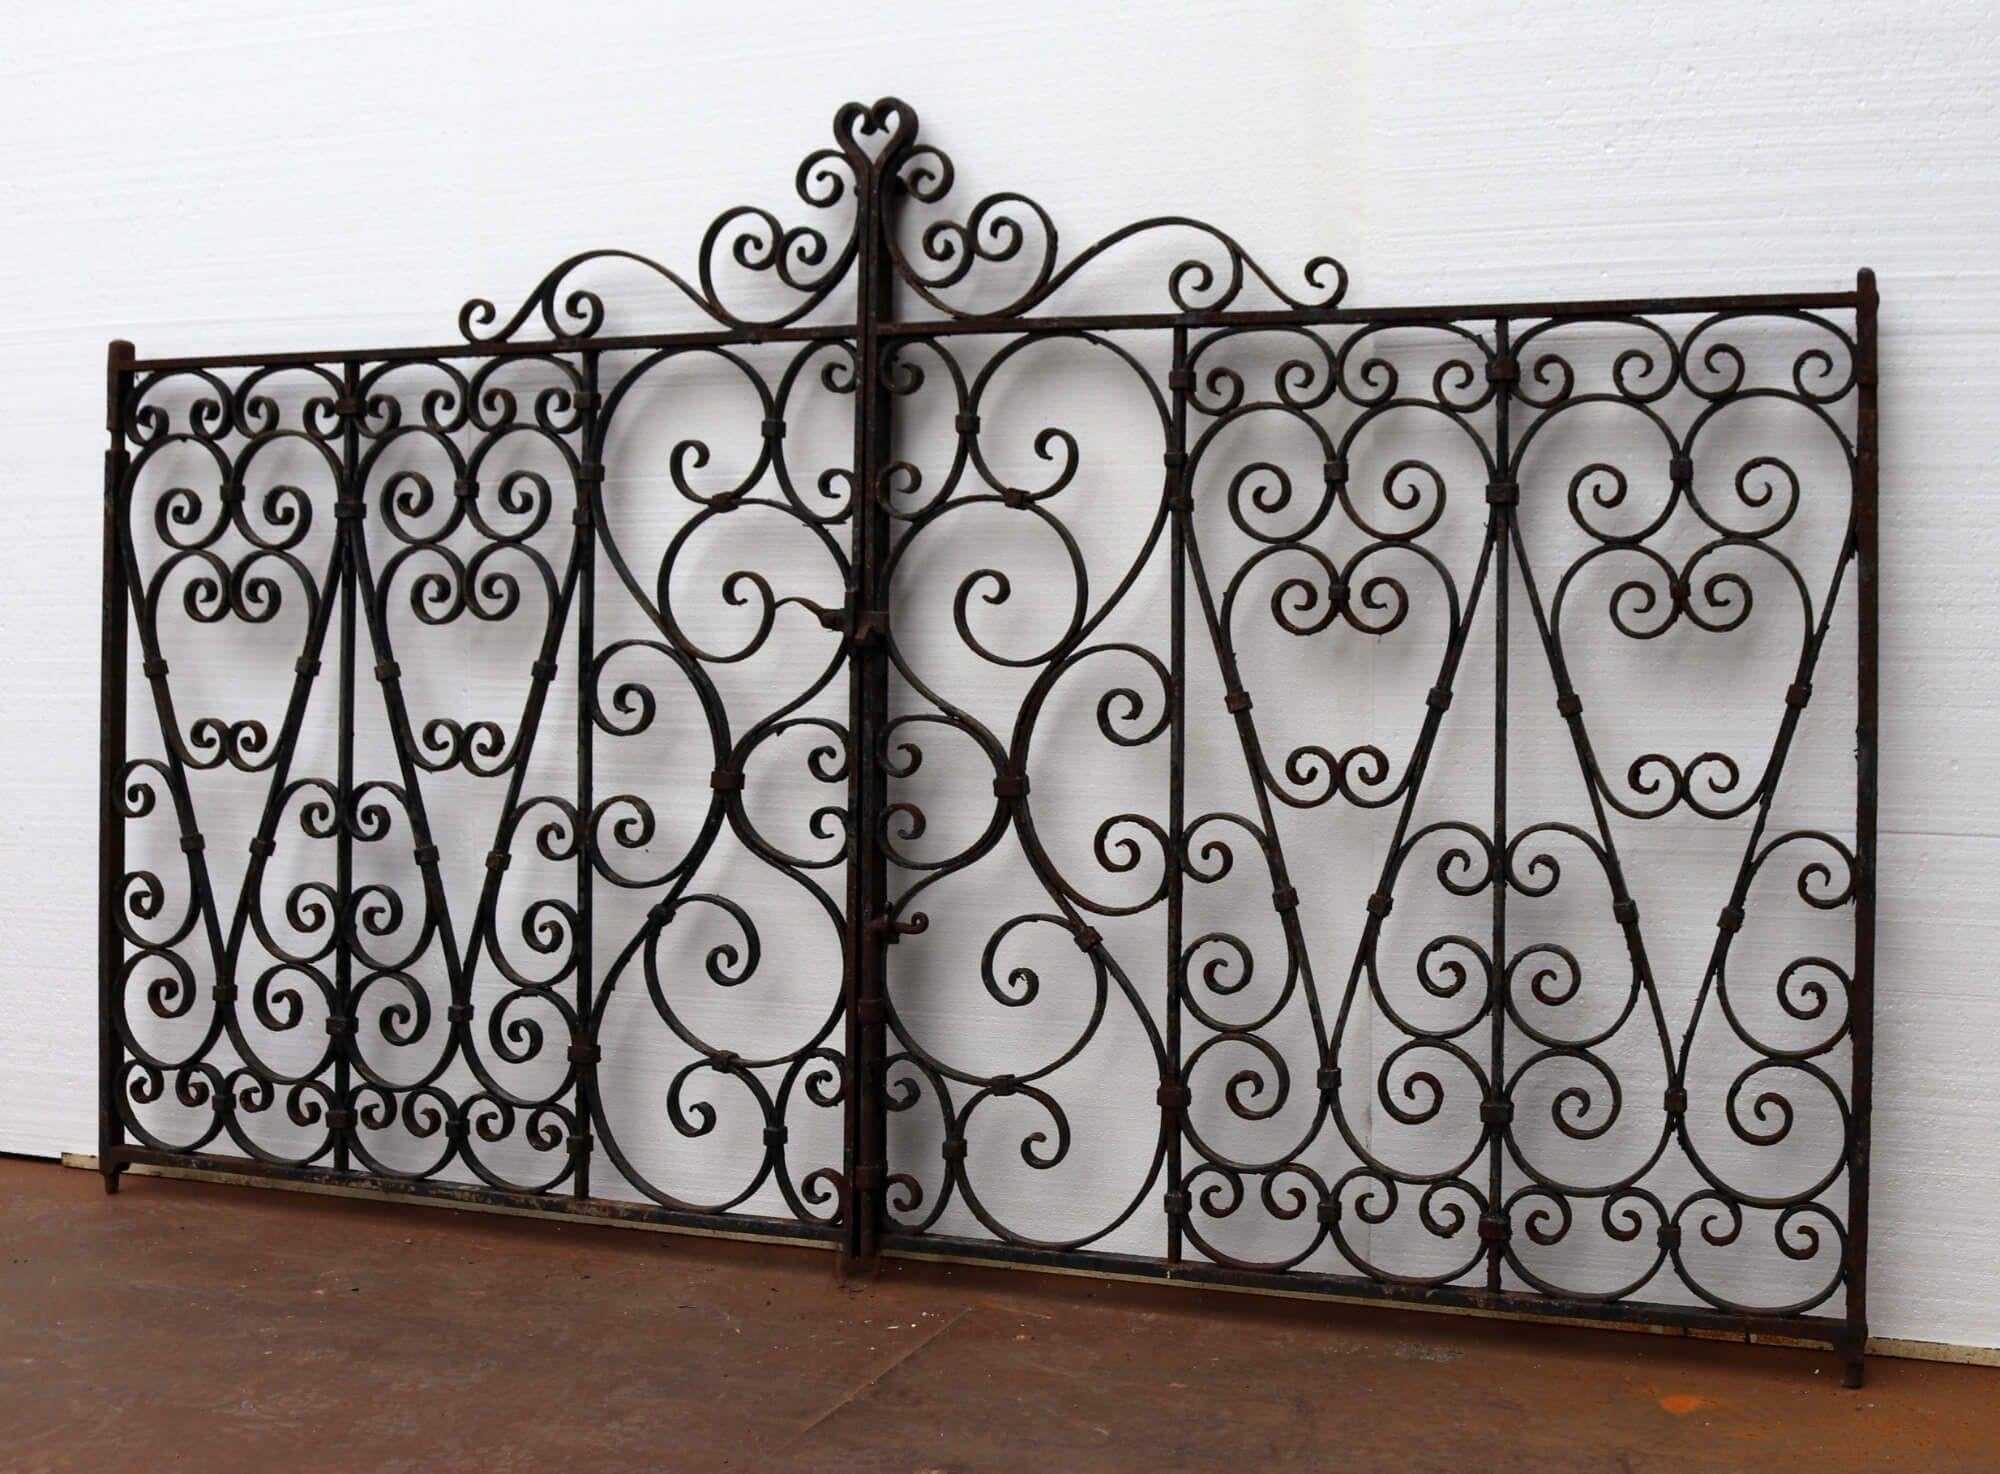 Detailed with an abundance of timeless scrollwork, this pair of Edwardian wrought iron gates make a beautiful set of driveway gates.

Alternatively, they could be used as an ornate pair of pedestrian garden gates at the side of a house or at the